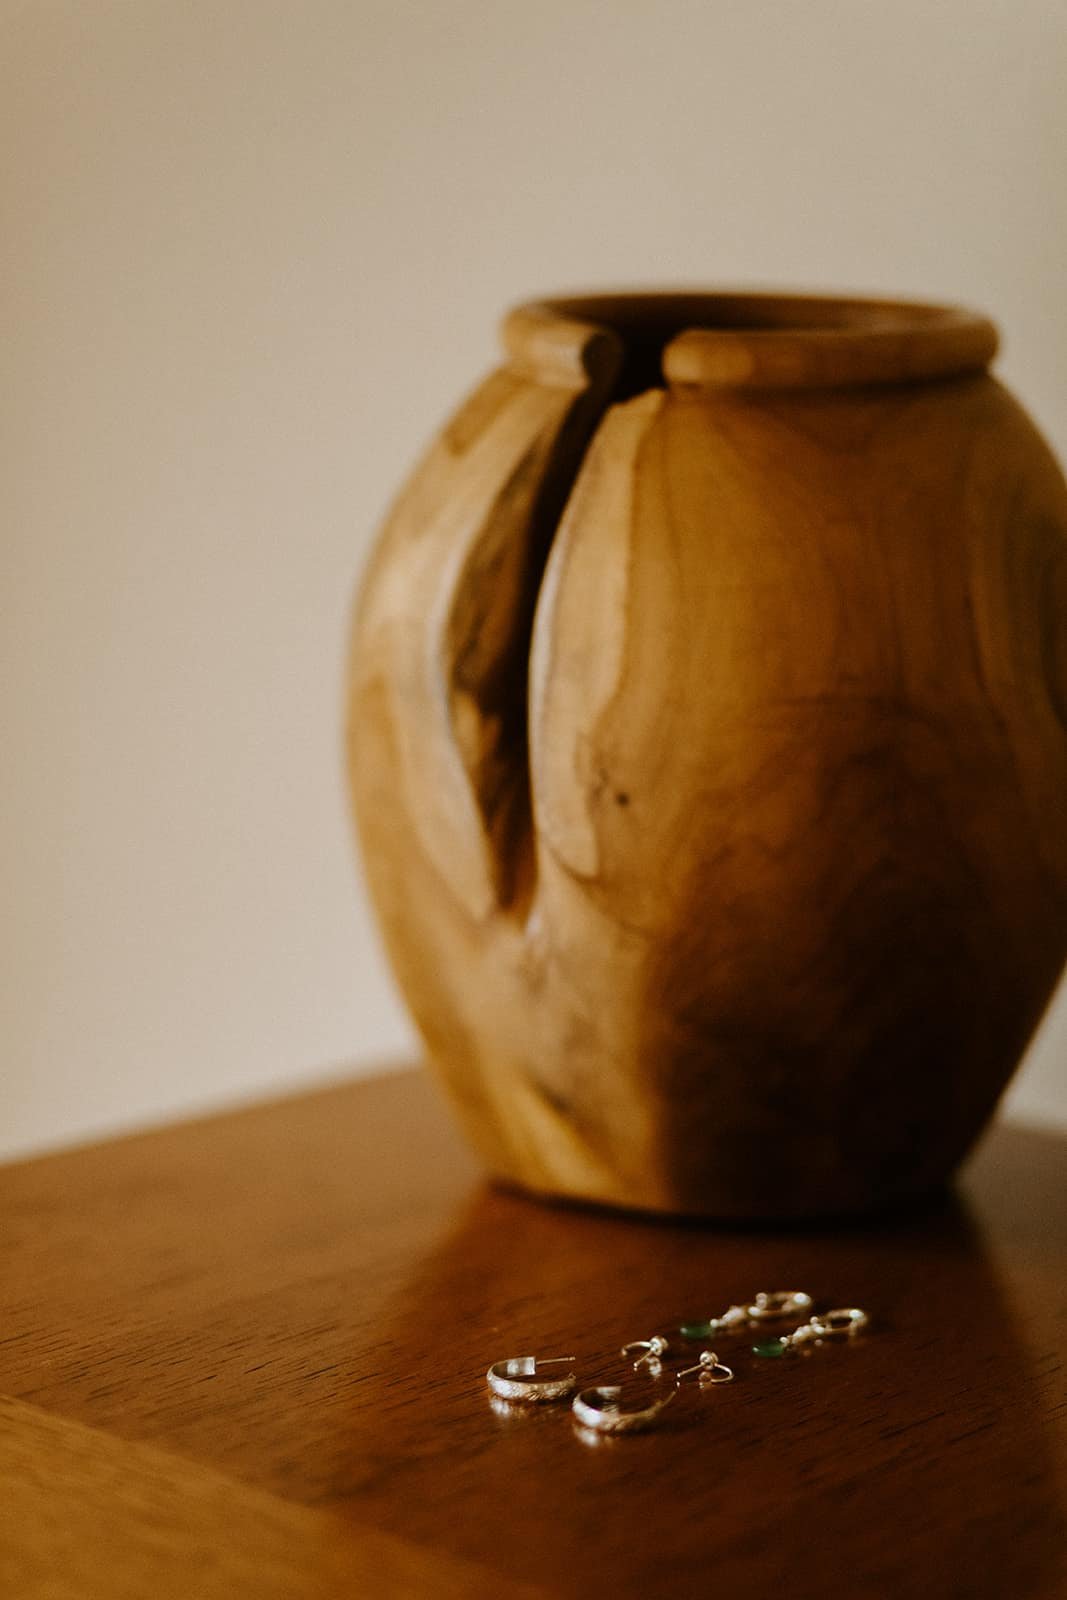 A pair of earrings sits next to a wood vase